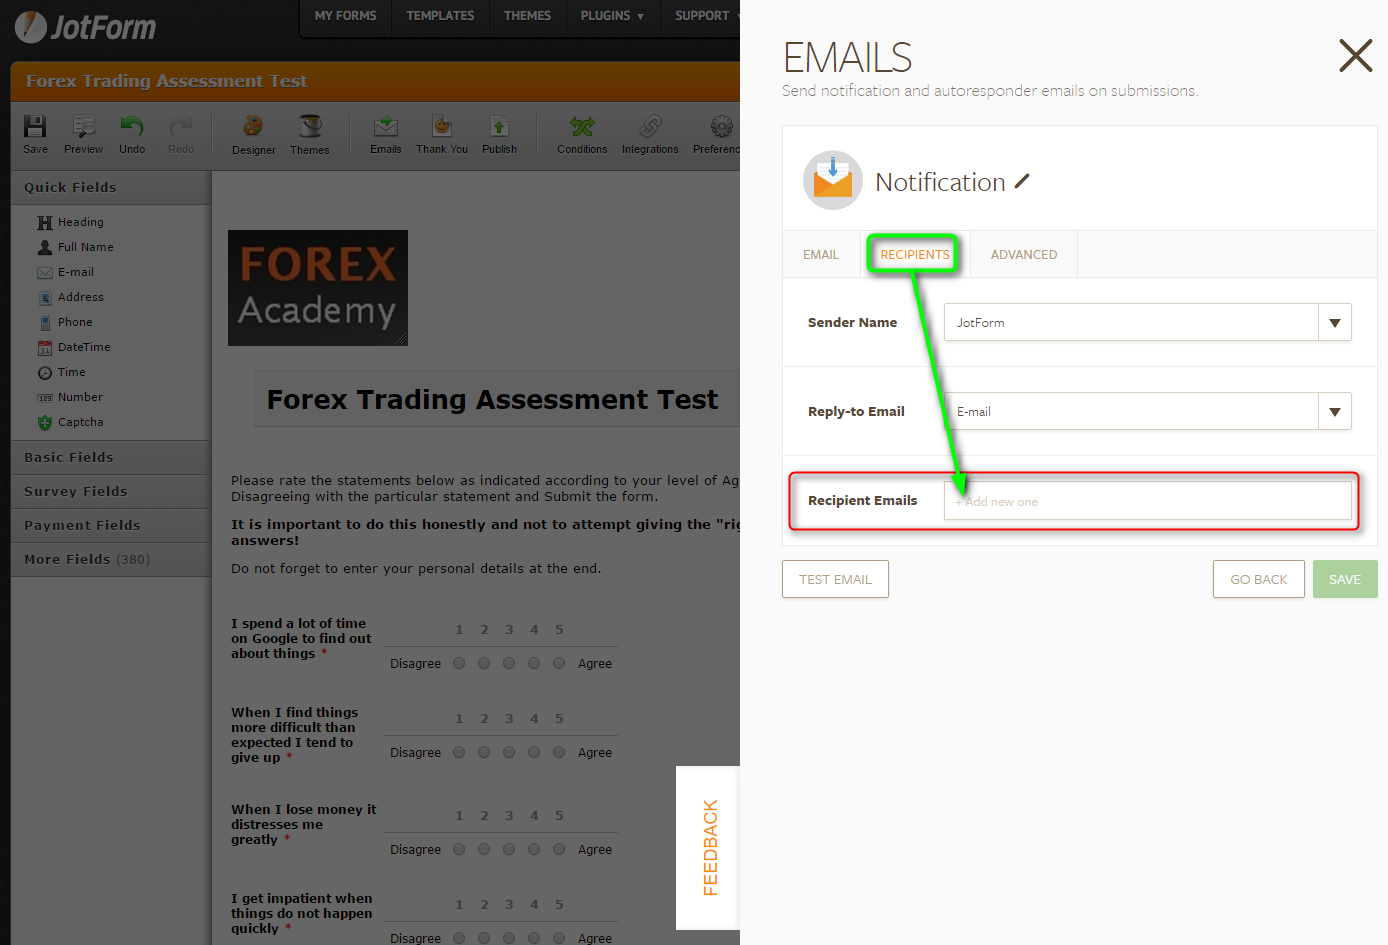 Why am I not receiving new submission notifications from one of my forms? Image 2 Screenshot 41